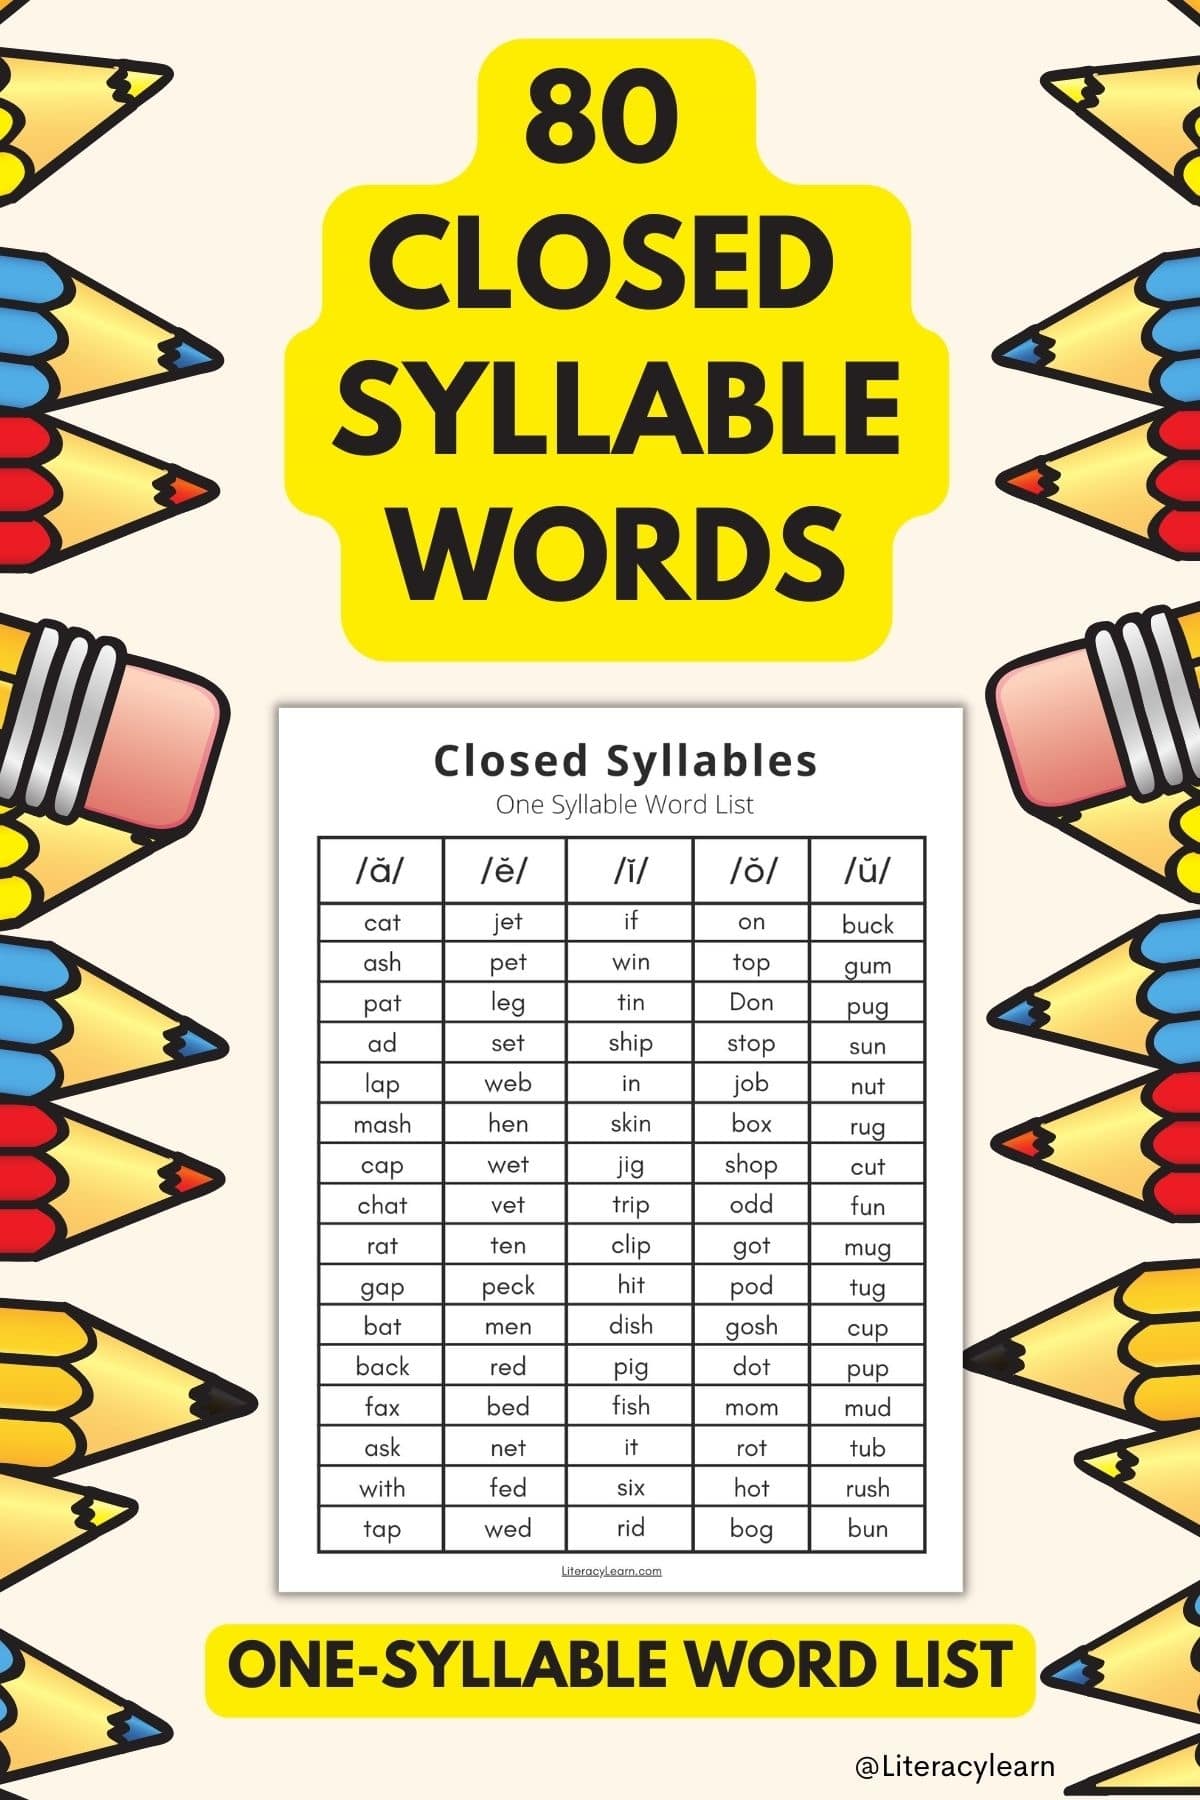 80-closed-syllable-words-word-list-free-printable-literacy-learn